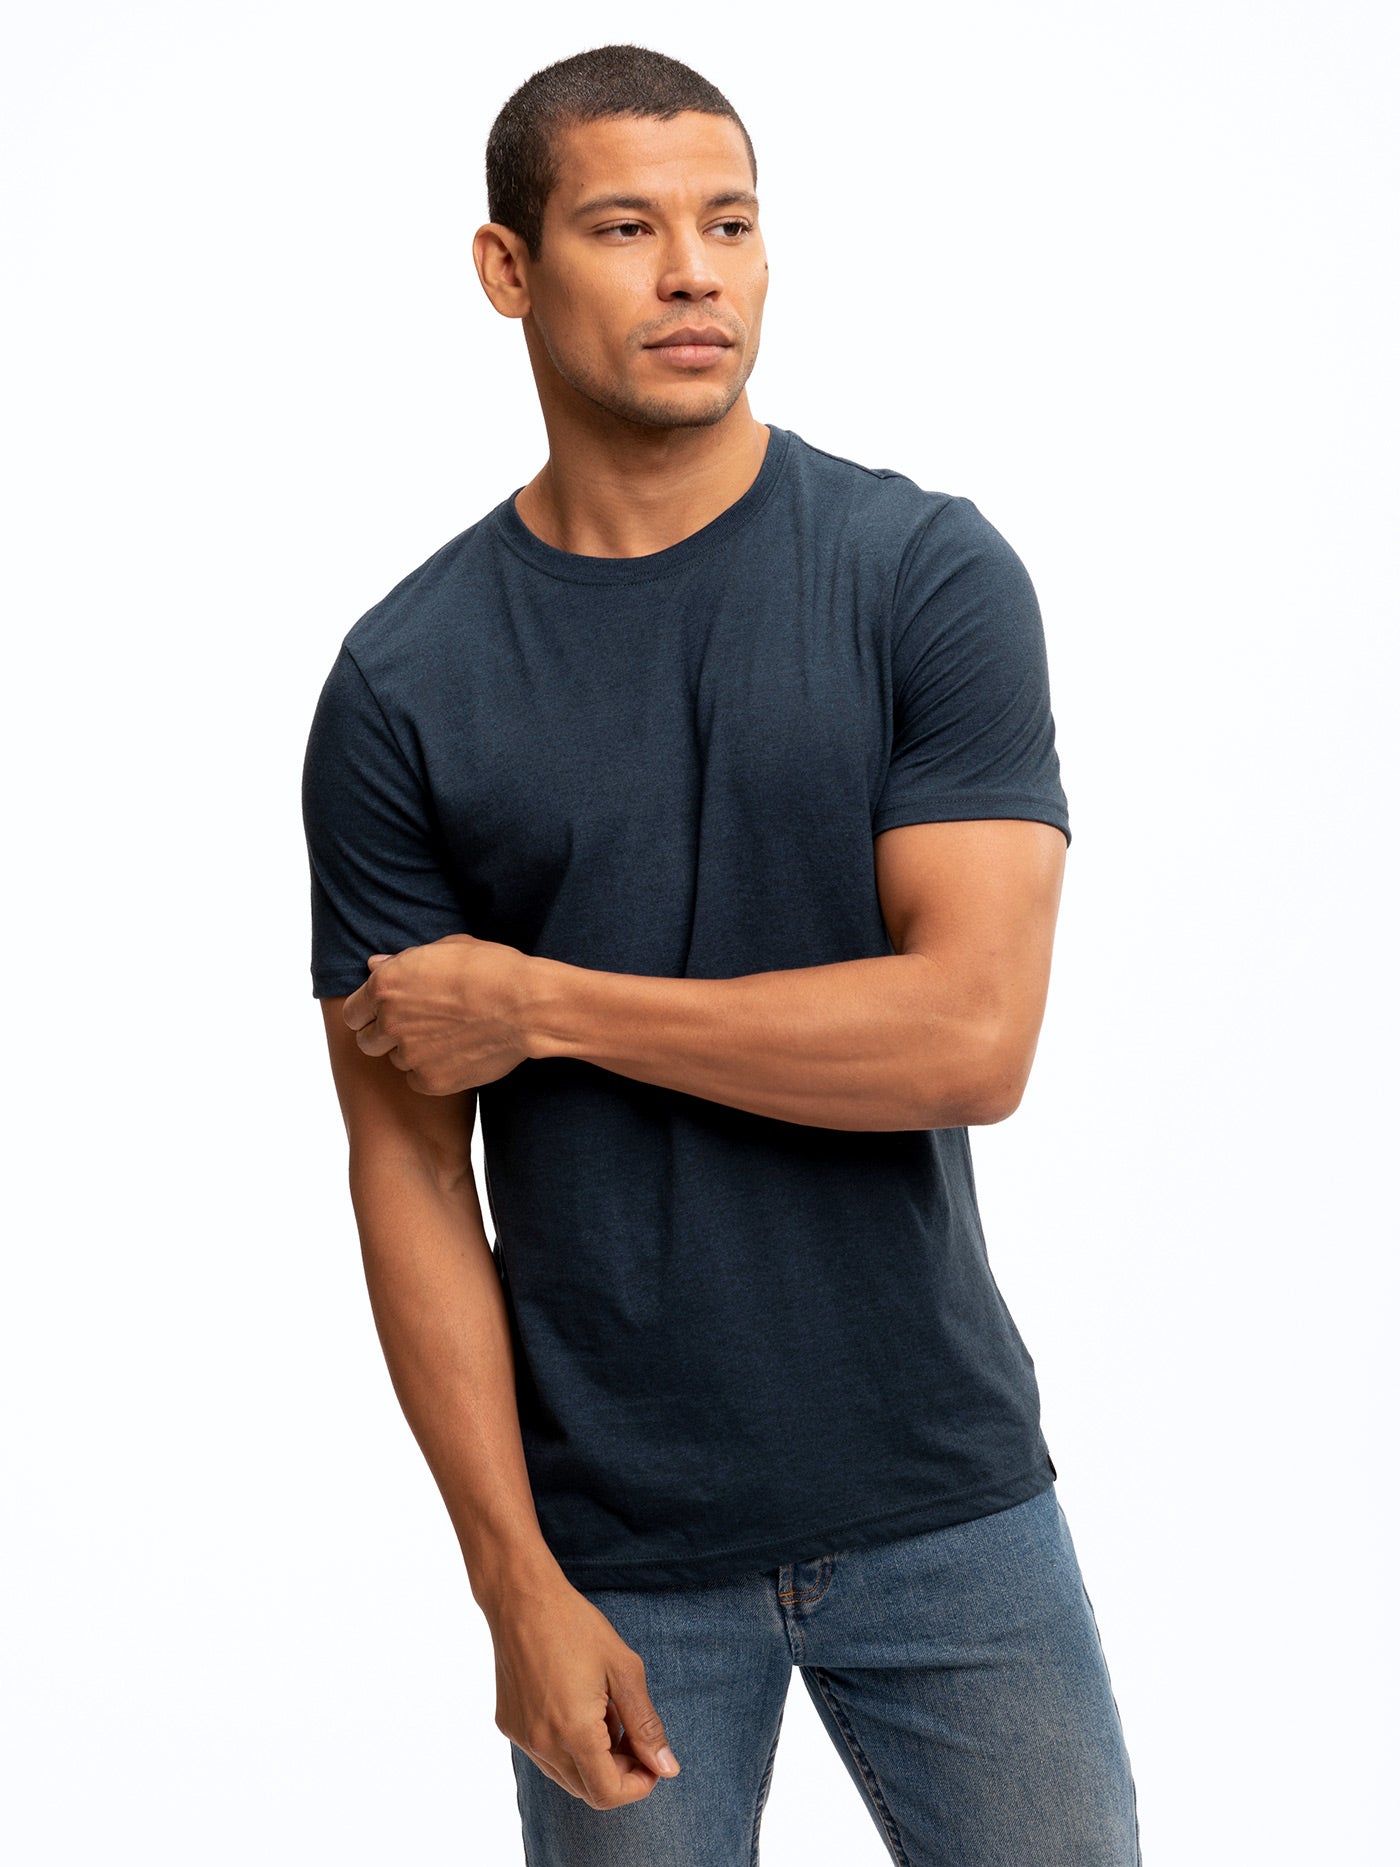 Triblend Crew Neck Tee in Heather Grey – Threads 4 Thought